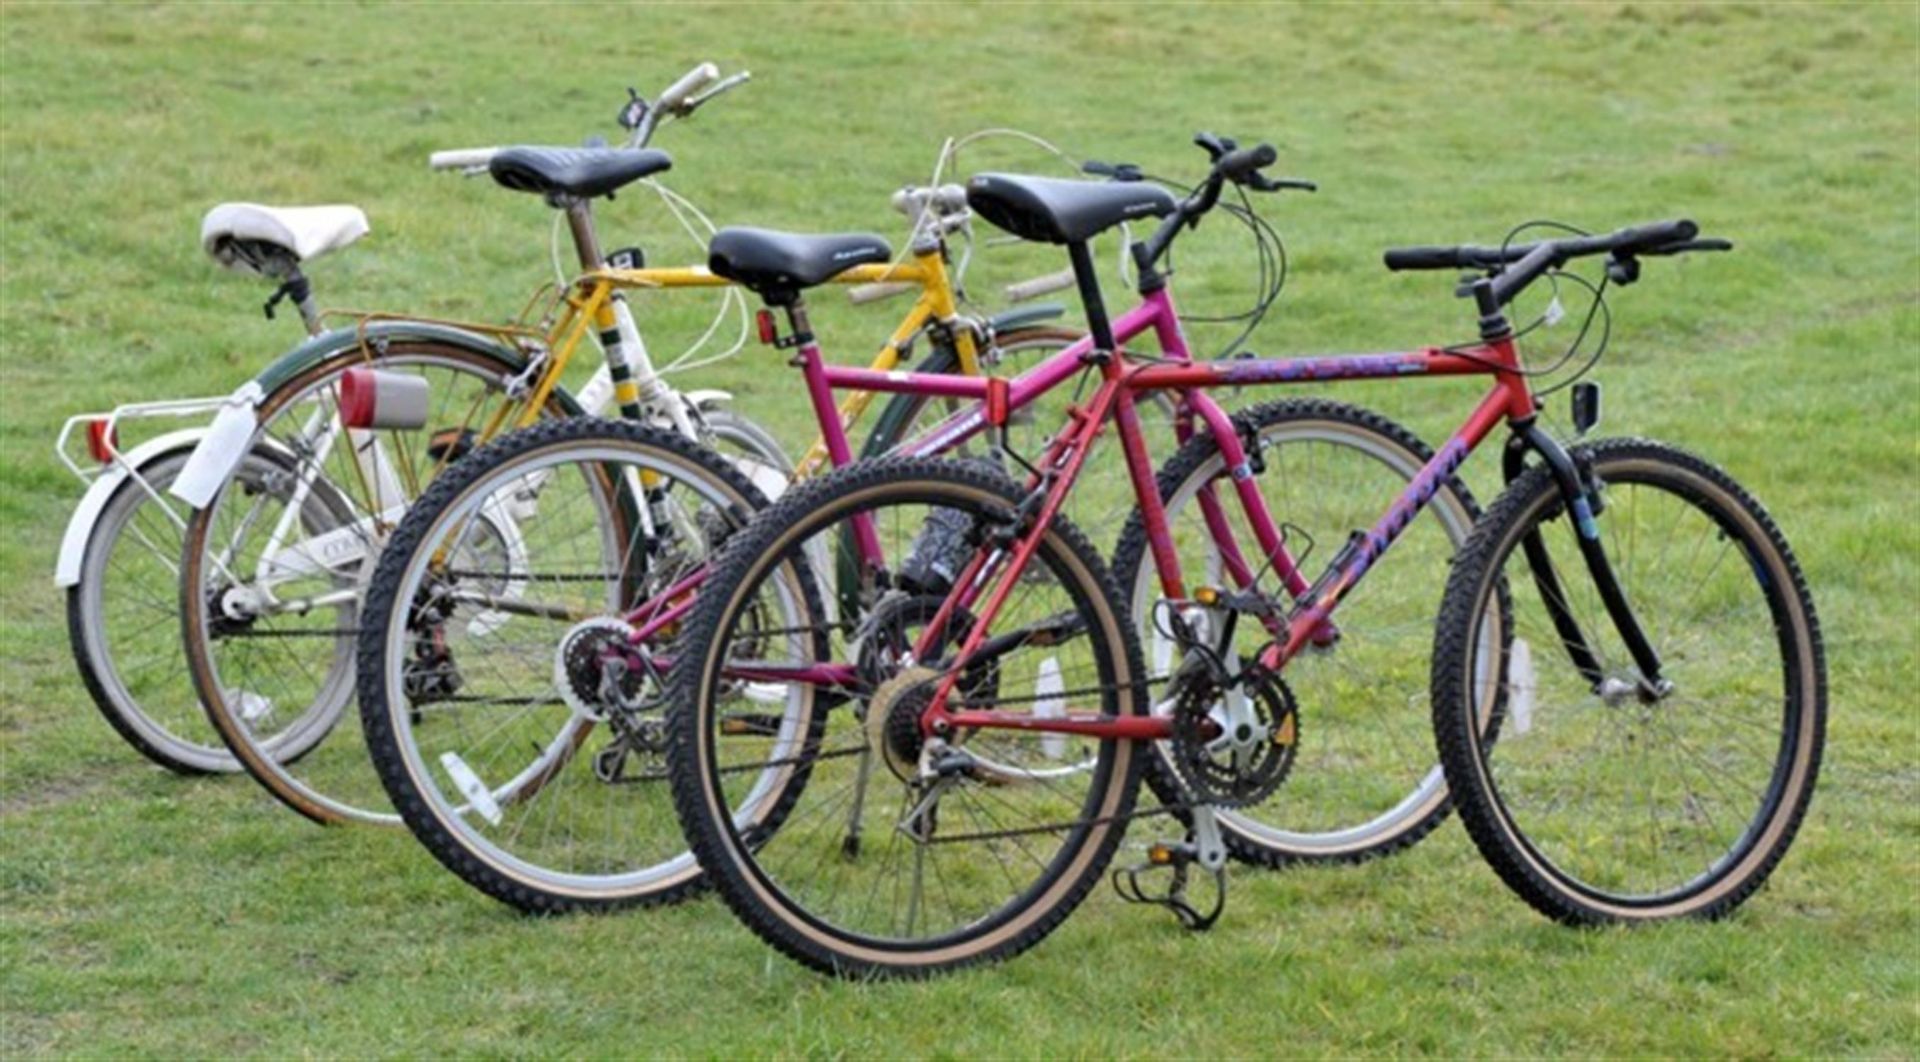 Four Bicycles to include Apollo, Raleigh white ladies cycle, Carrera Boys bike, Dawes Gents bike in - Image 4 of 5